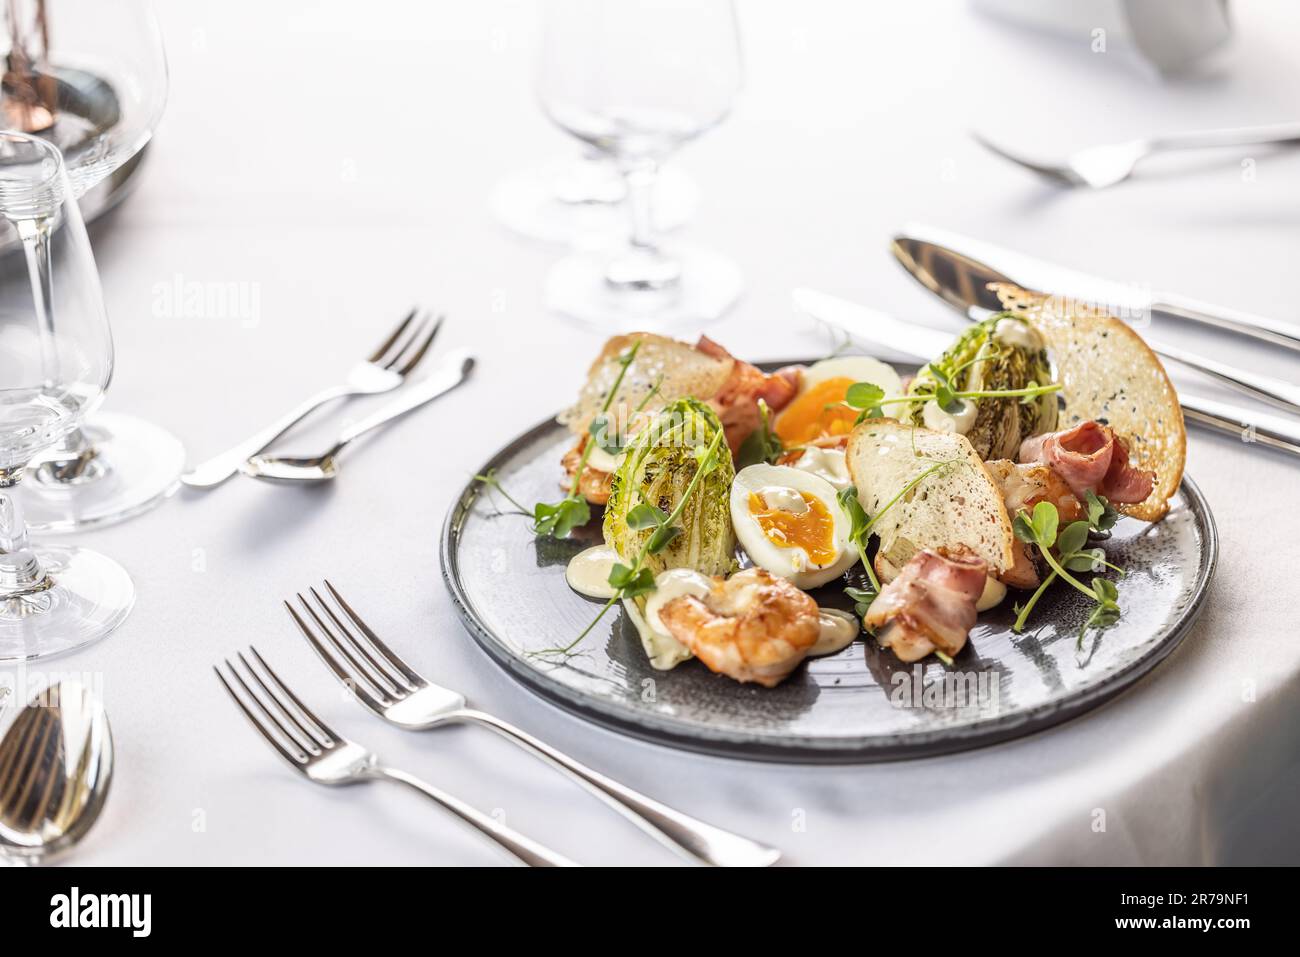 Luxury restaurant serves a modern twist on the classical ceasar salad on a dark plate. Stock Photo